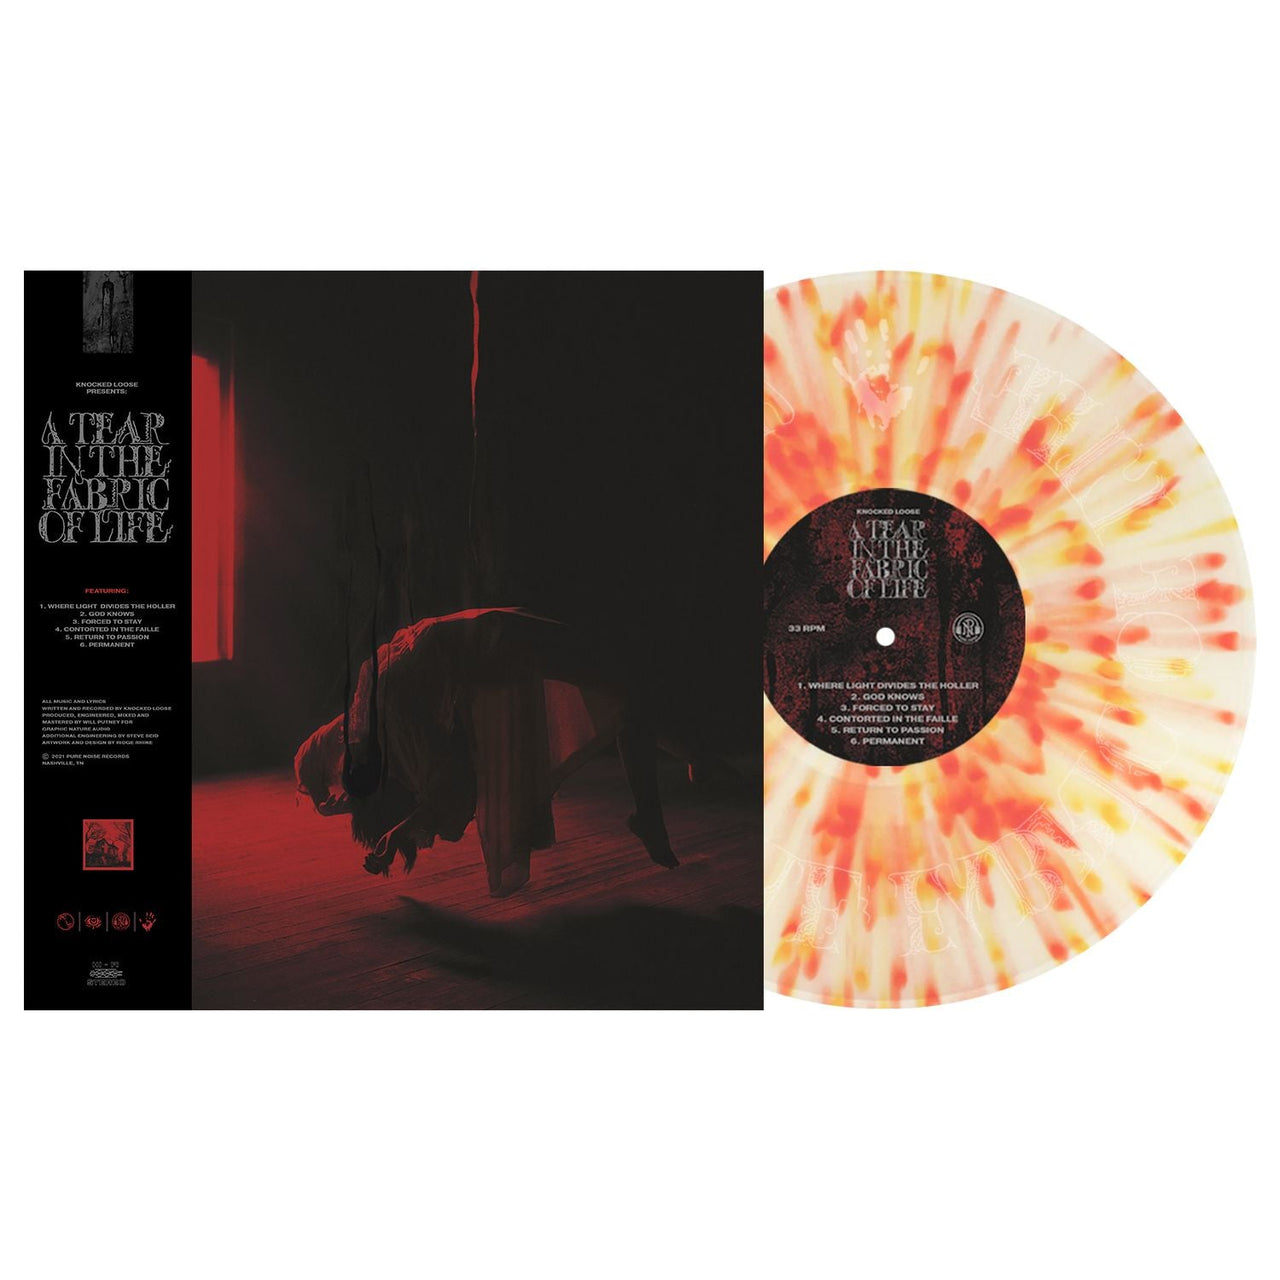 Knocked Loose "A Tear In The Fabric Of Life" 12" Vinyl